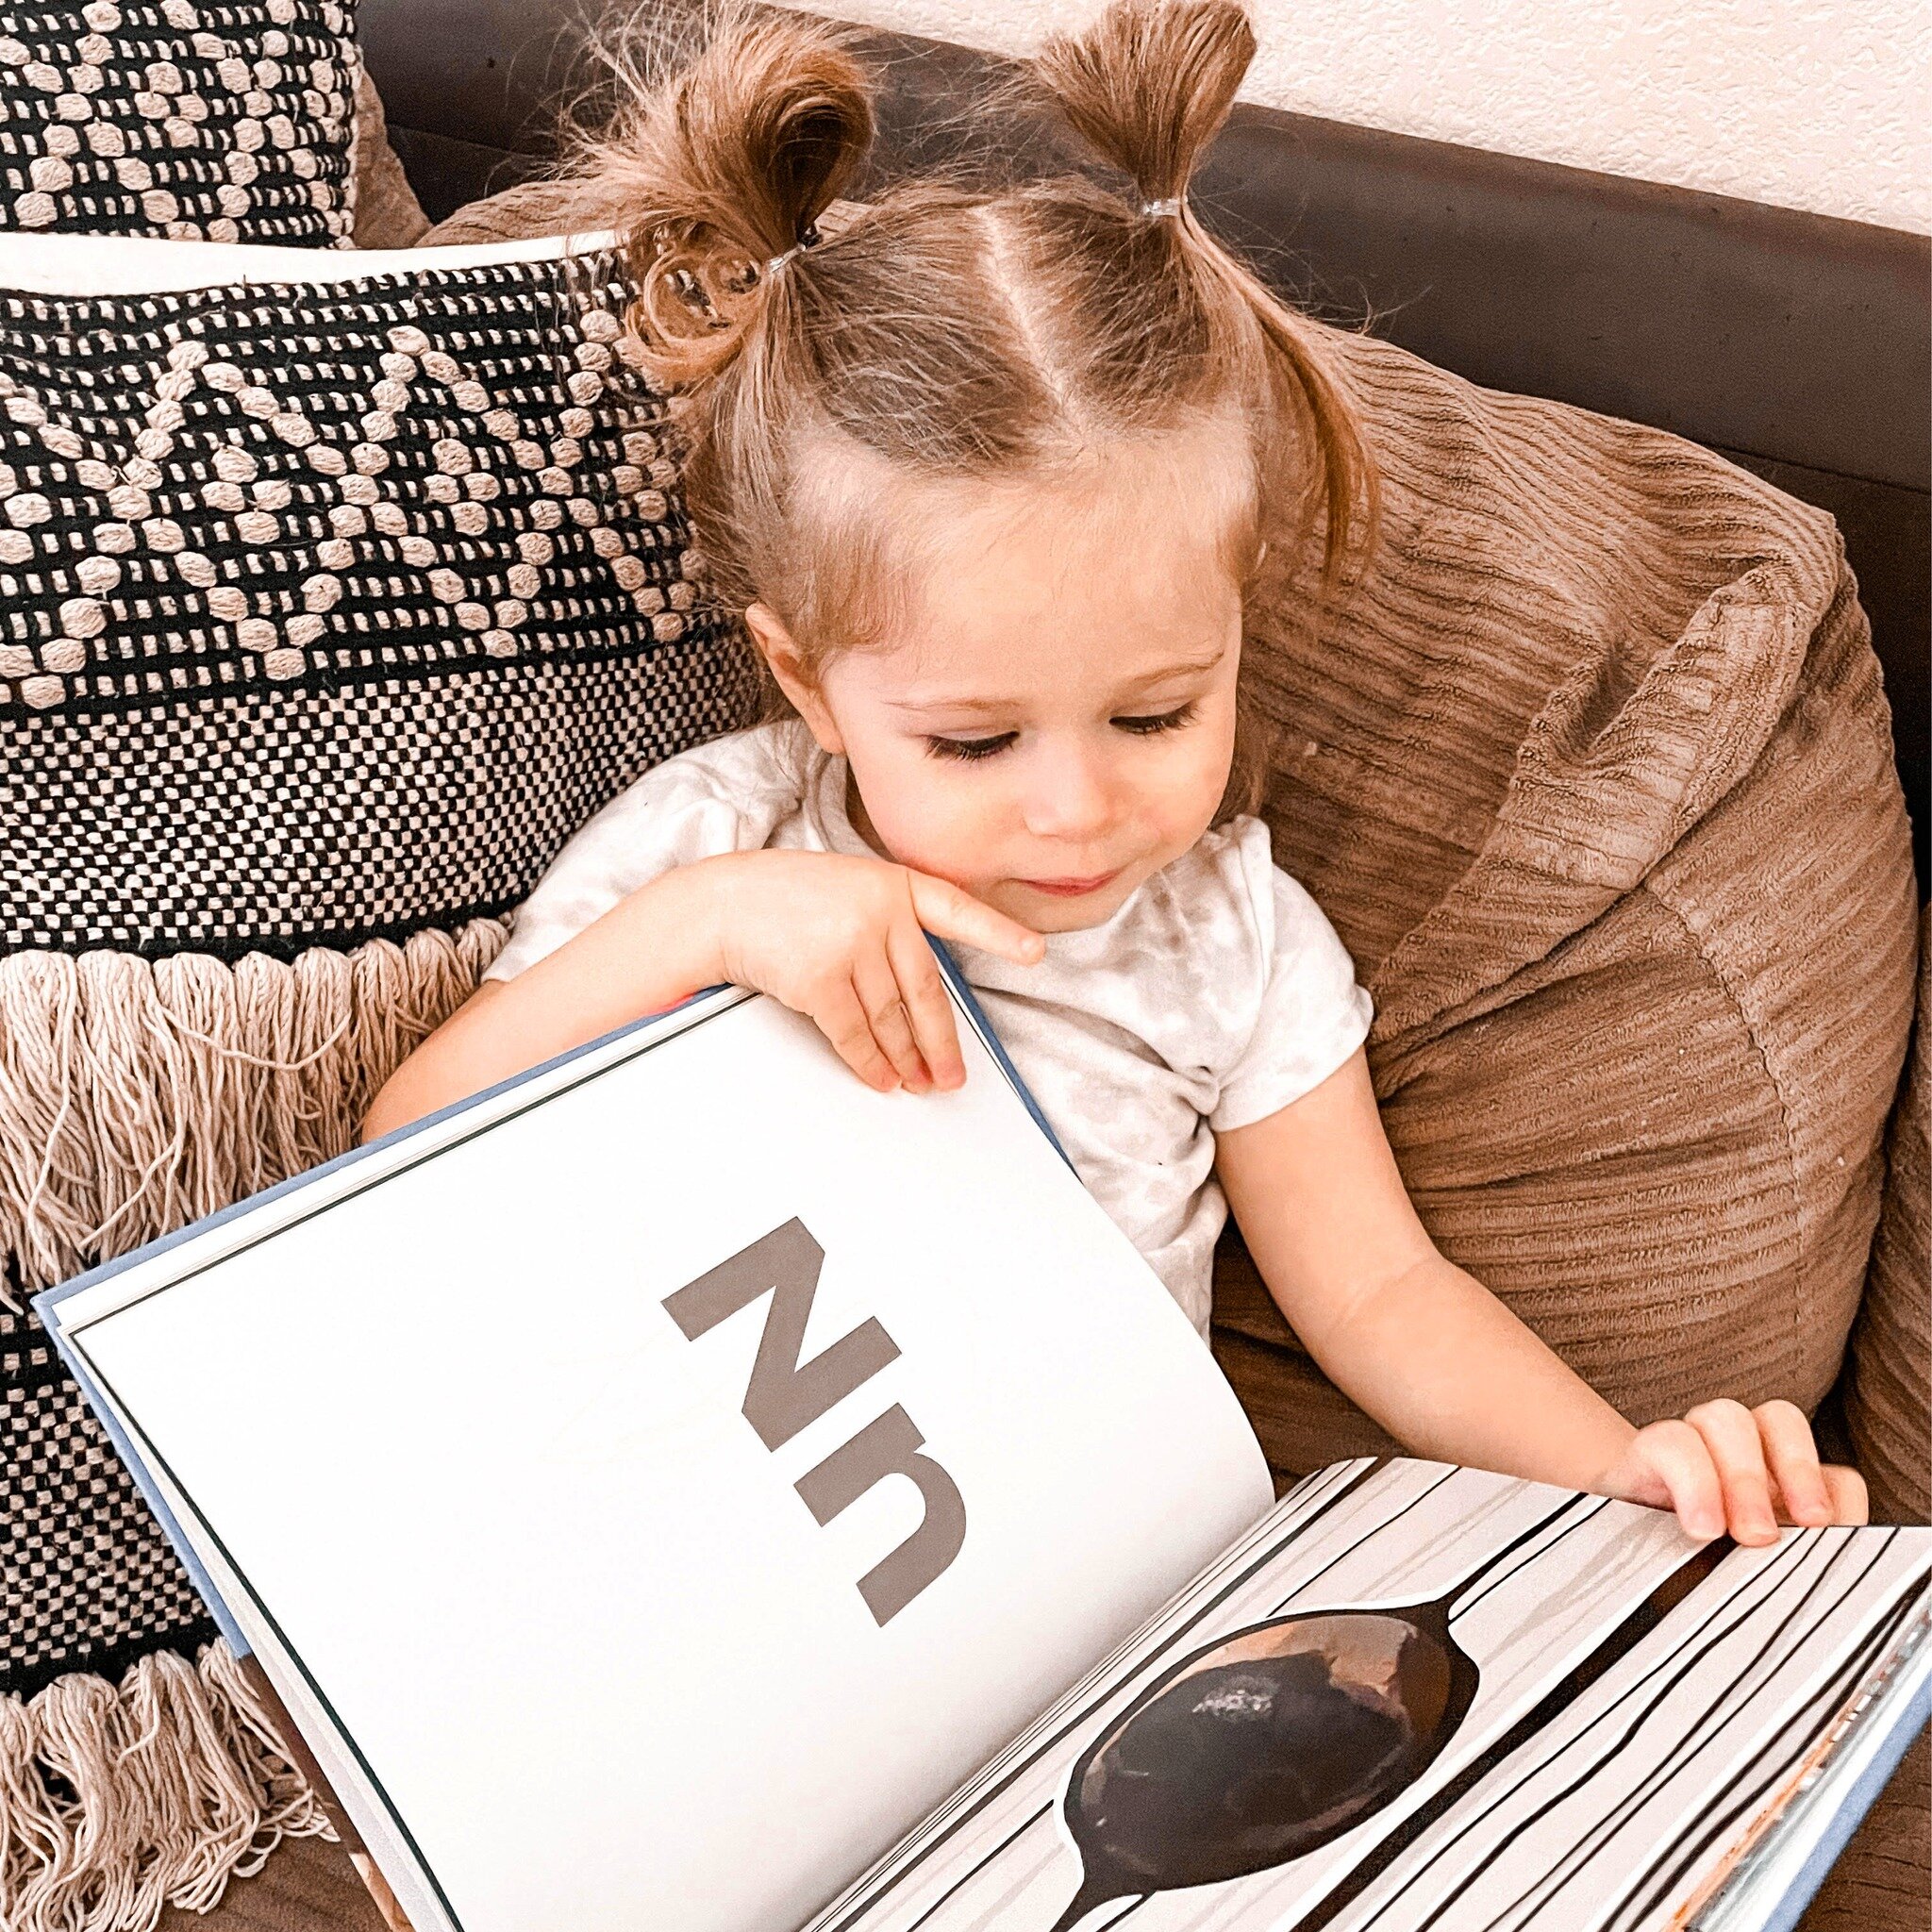 Harlow Jarvis, age 3, loves The Alphabet With Milo! She says, &quot;I love Milo and how he shows each of the letters in the book. Milo is fun and so silly! My favorite picture is the picture N for his nose. The Milo letter book is my favorite book to